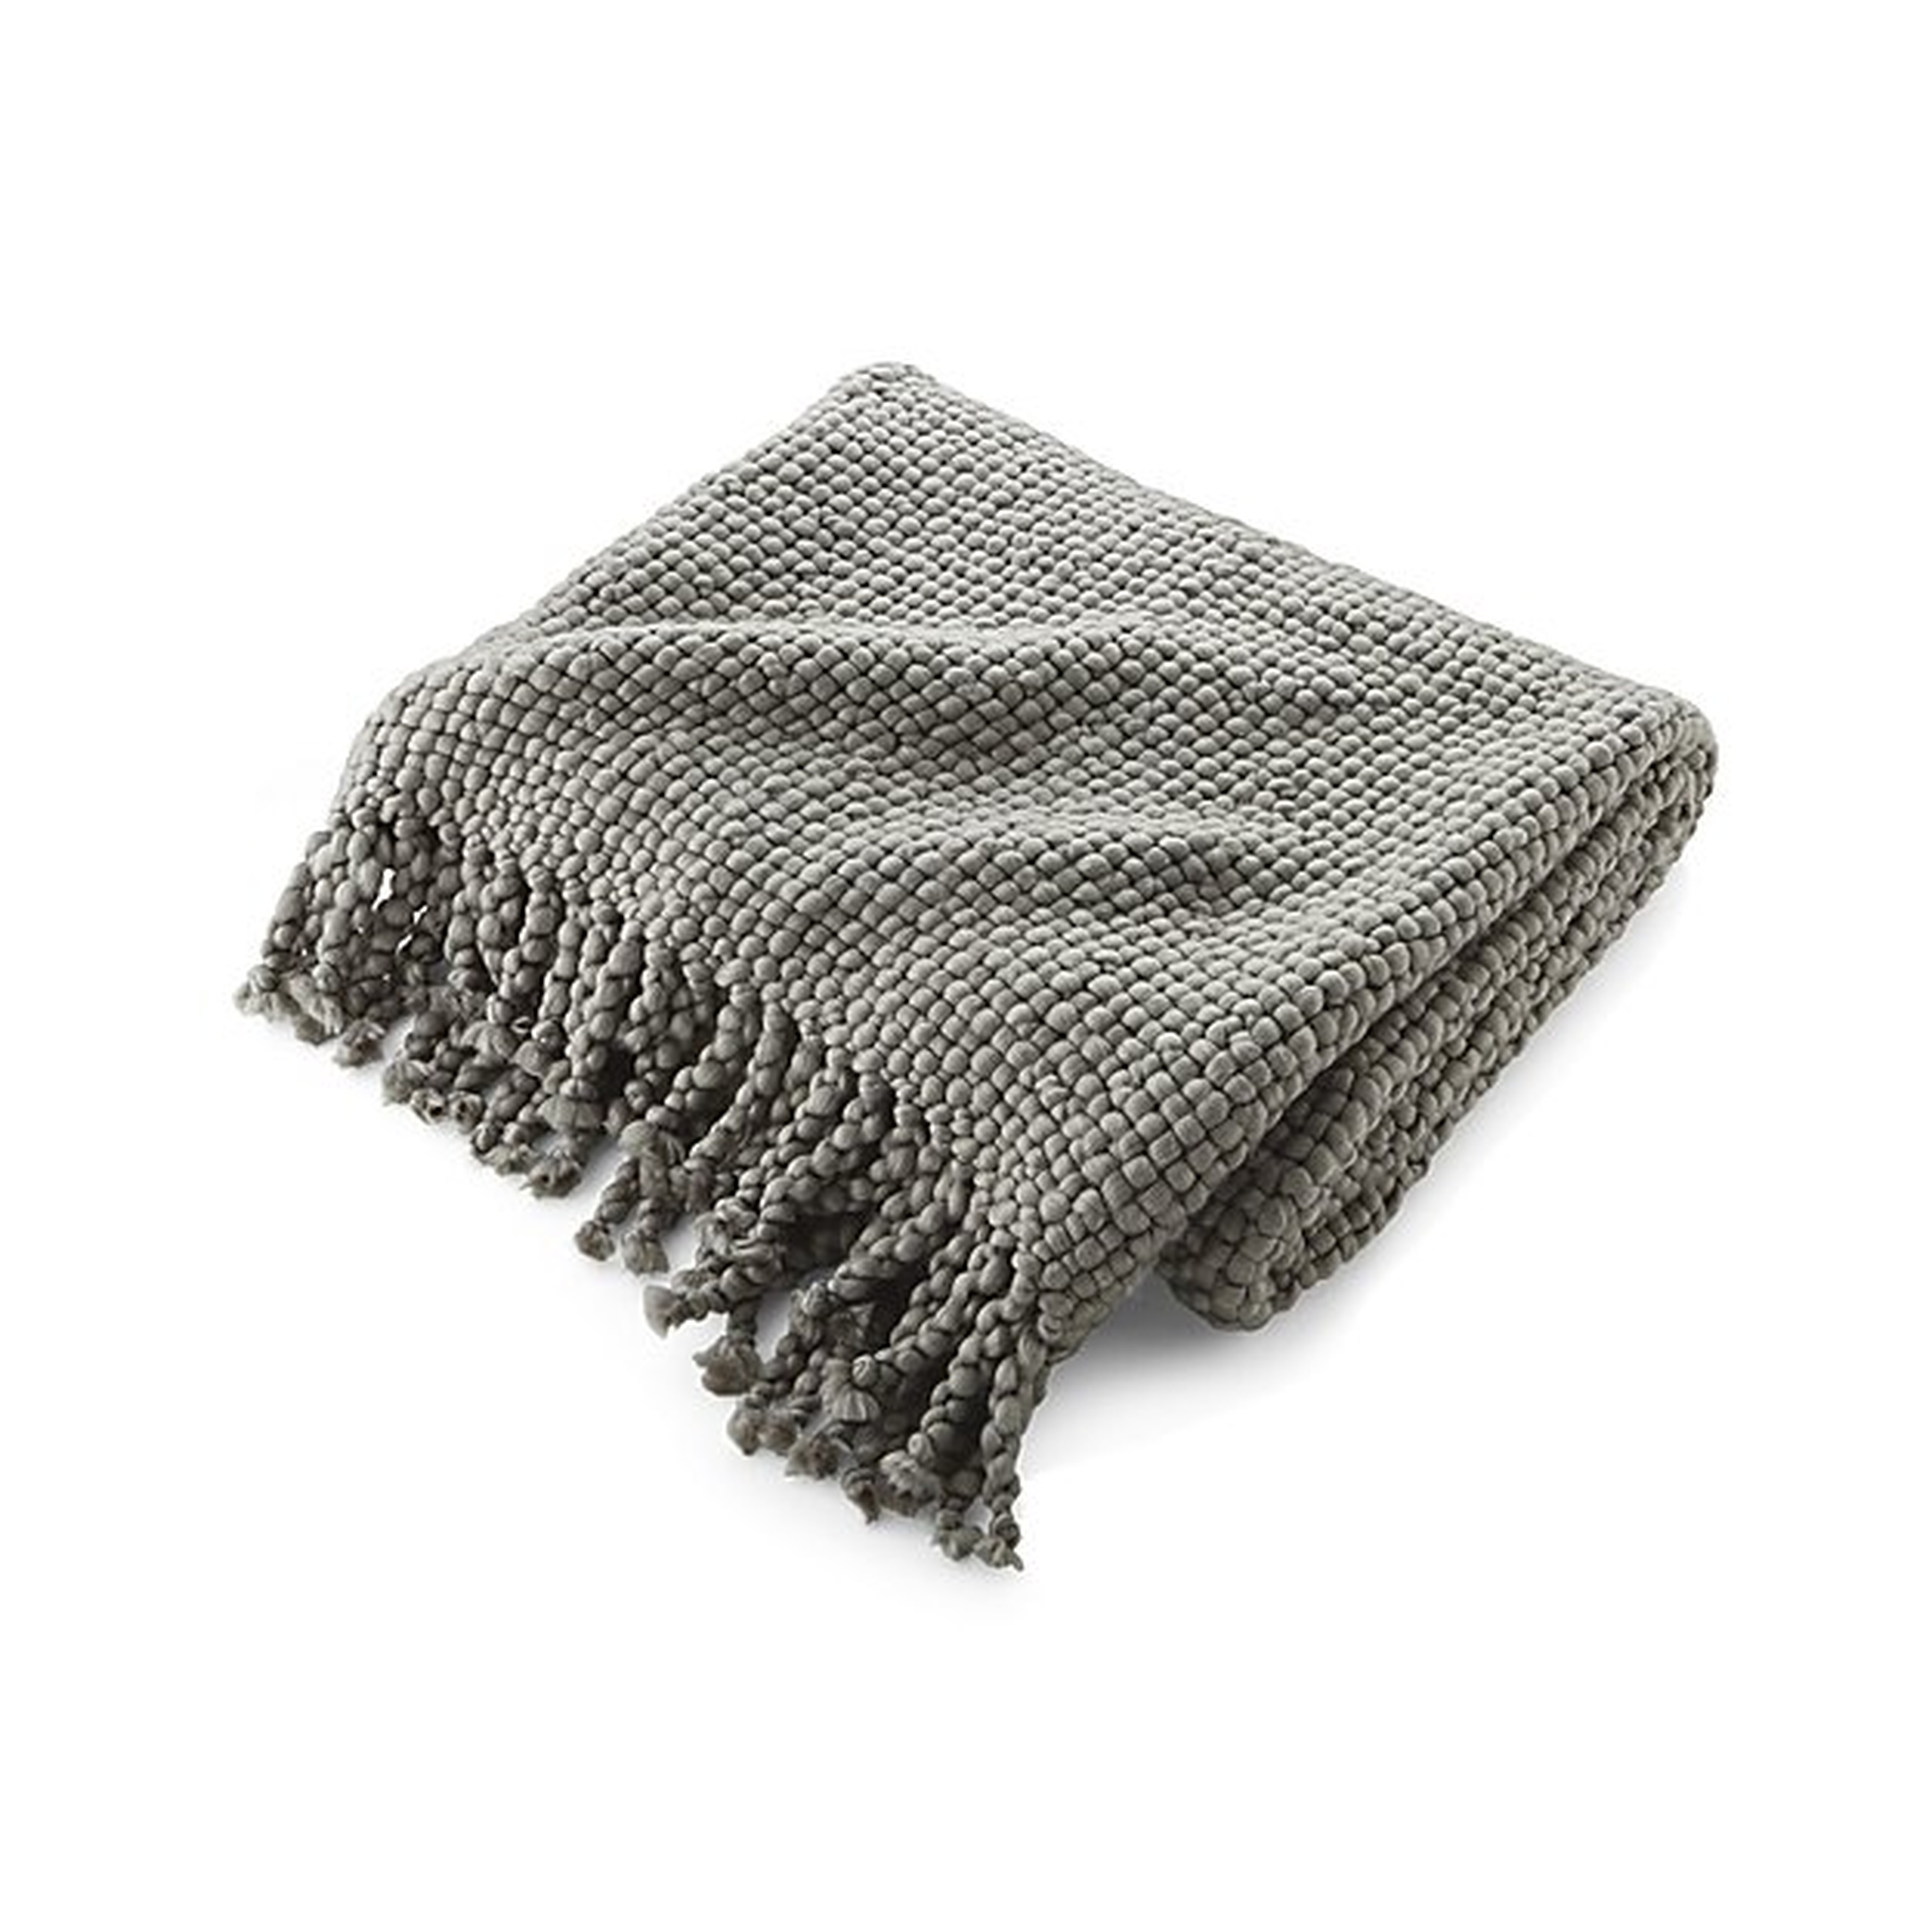 Cozy Weave Grey Throw - Crate and Barrel